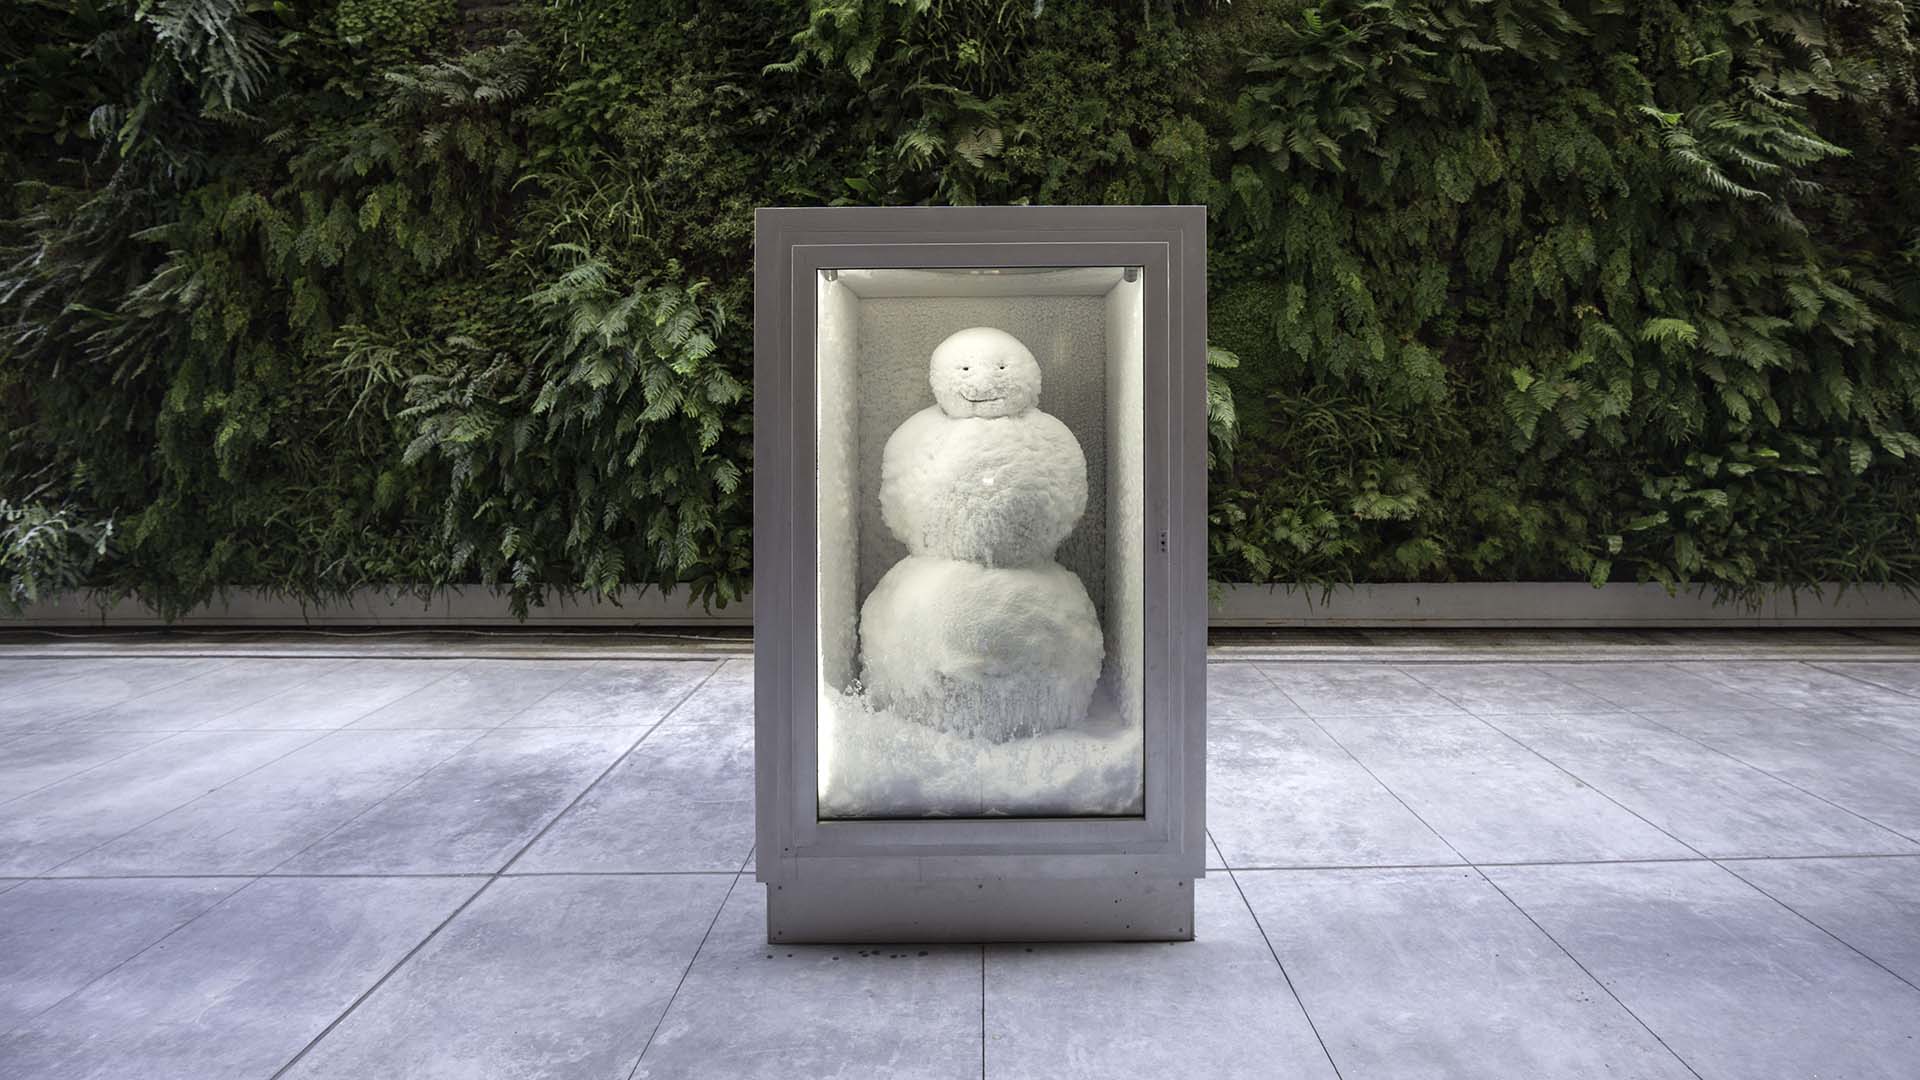 GOMA Will Soon Be Home to a Real Snowman That Can Survive an Entire Summer